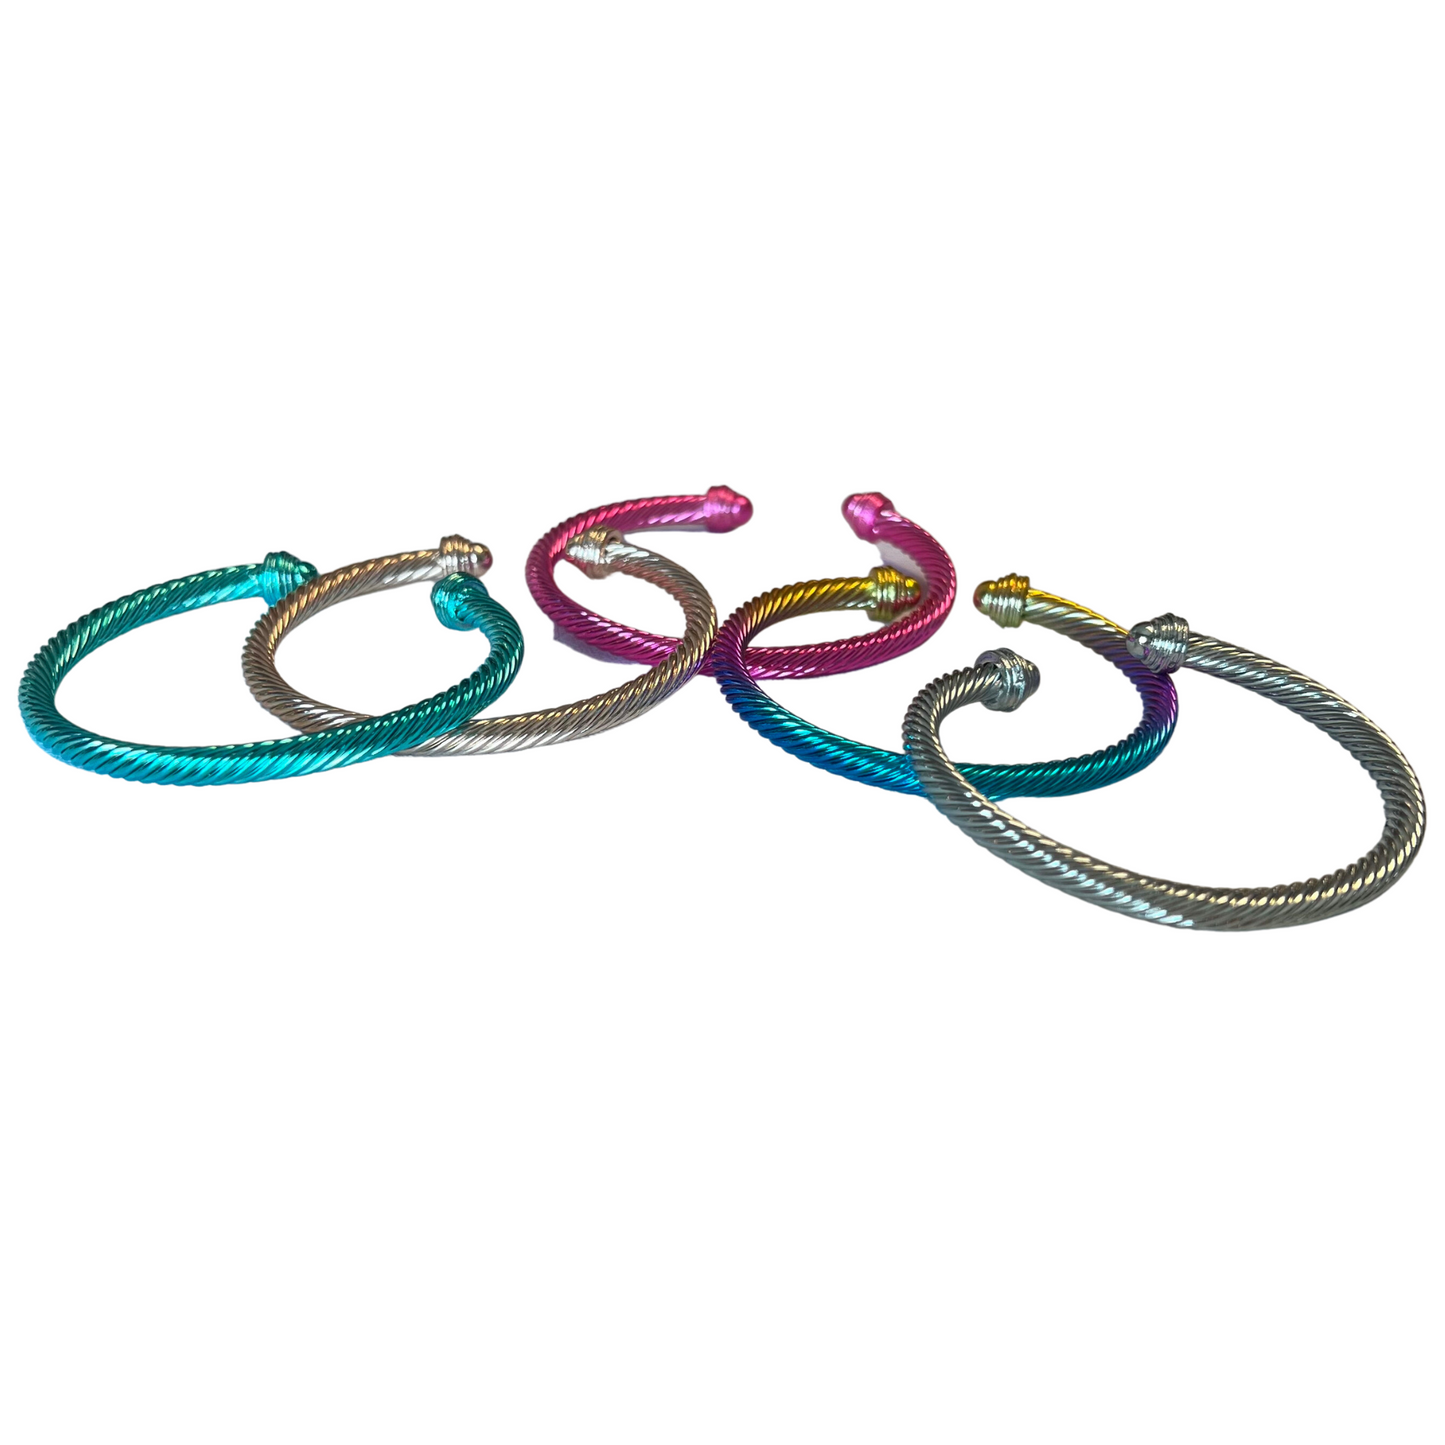 Introducing Cuff Bangles - a stylish accessory for any look. These bangles come in five different colors - multicolor, silver, gold, blue, and pink - so you can find the perfect hue to match your style. Crafted with quality materials, these bangles are perfect for making any look stand out.